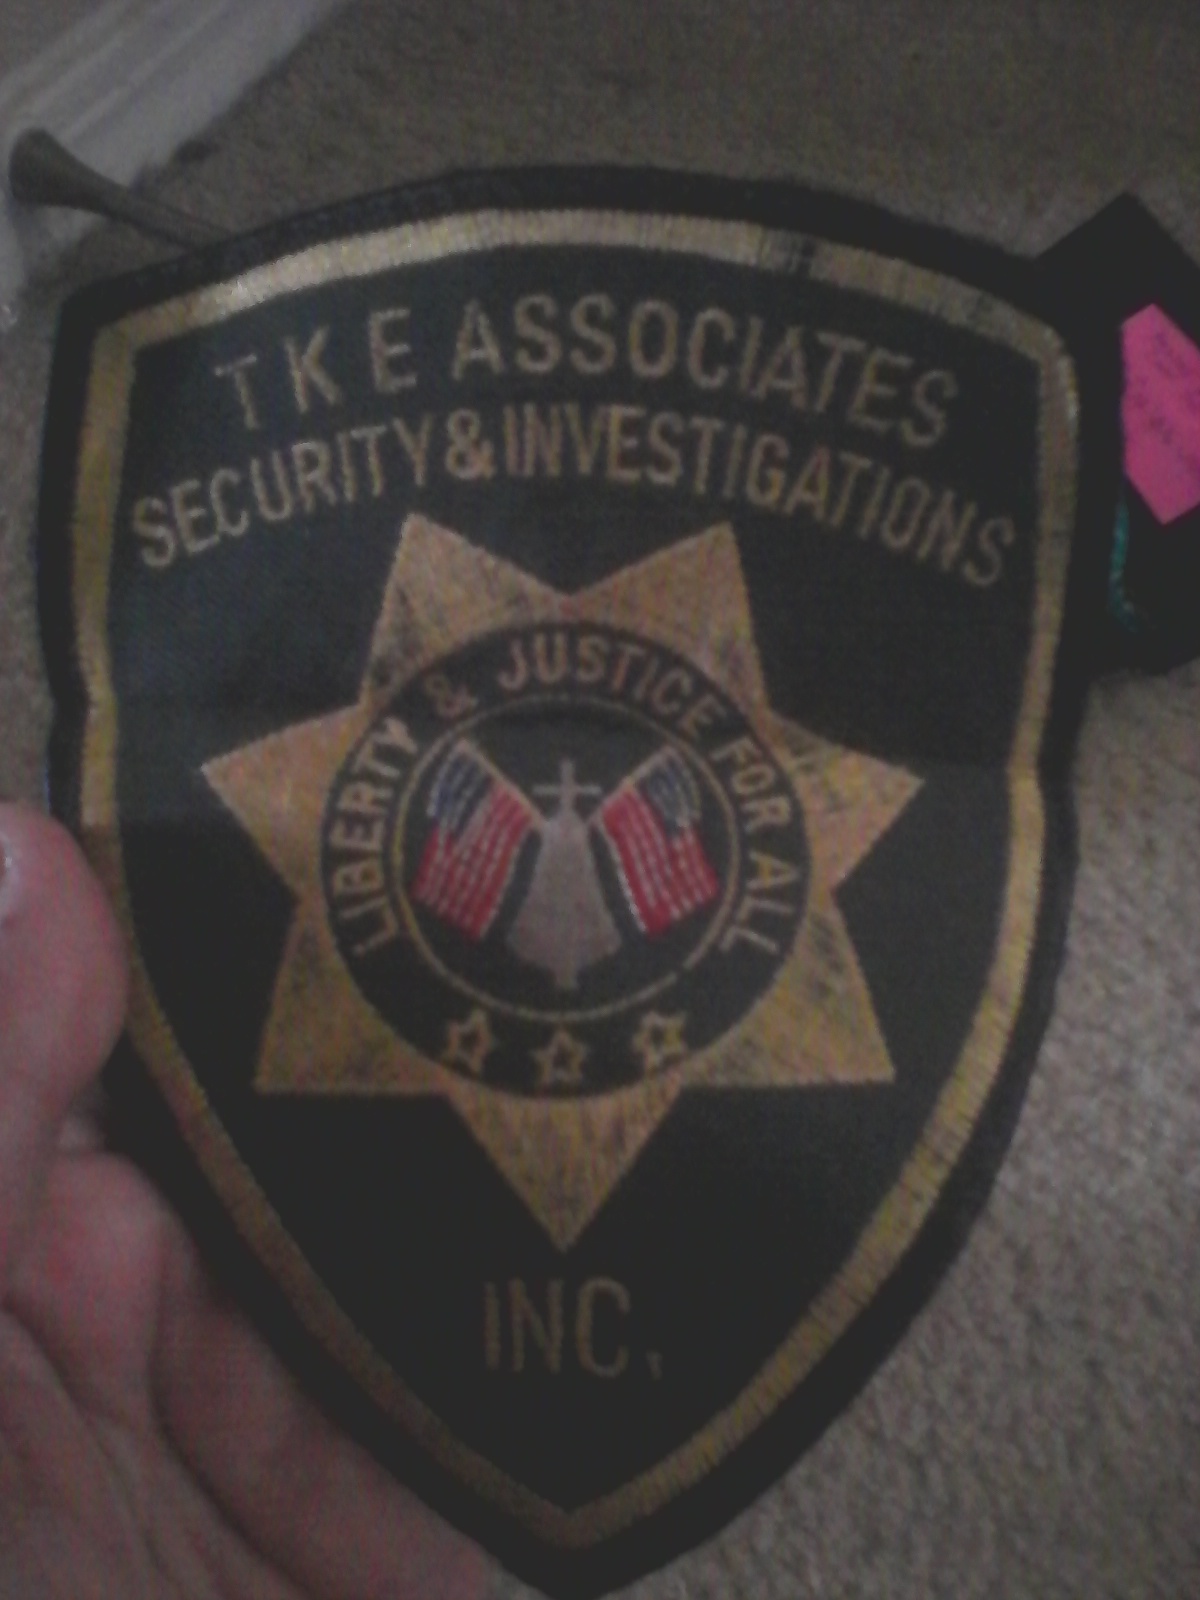 EX Captain TKE Private Security and Investigations